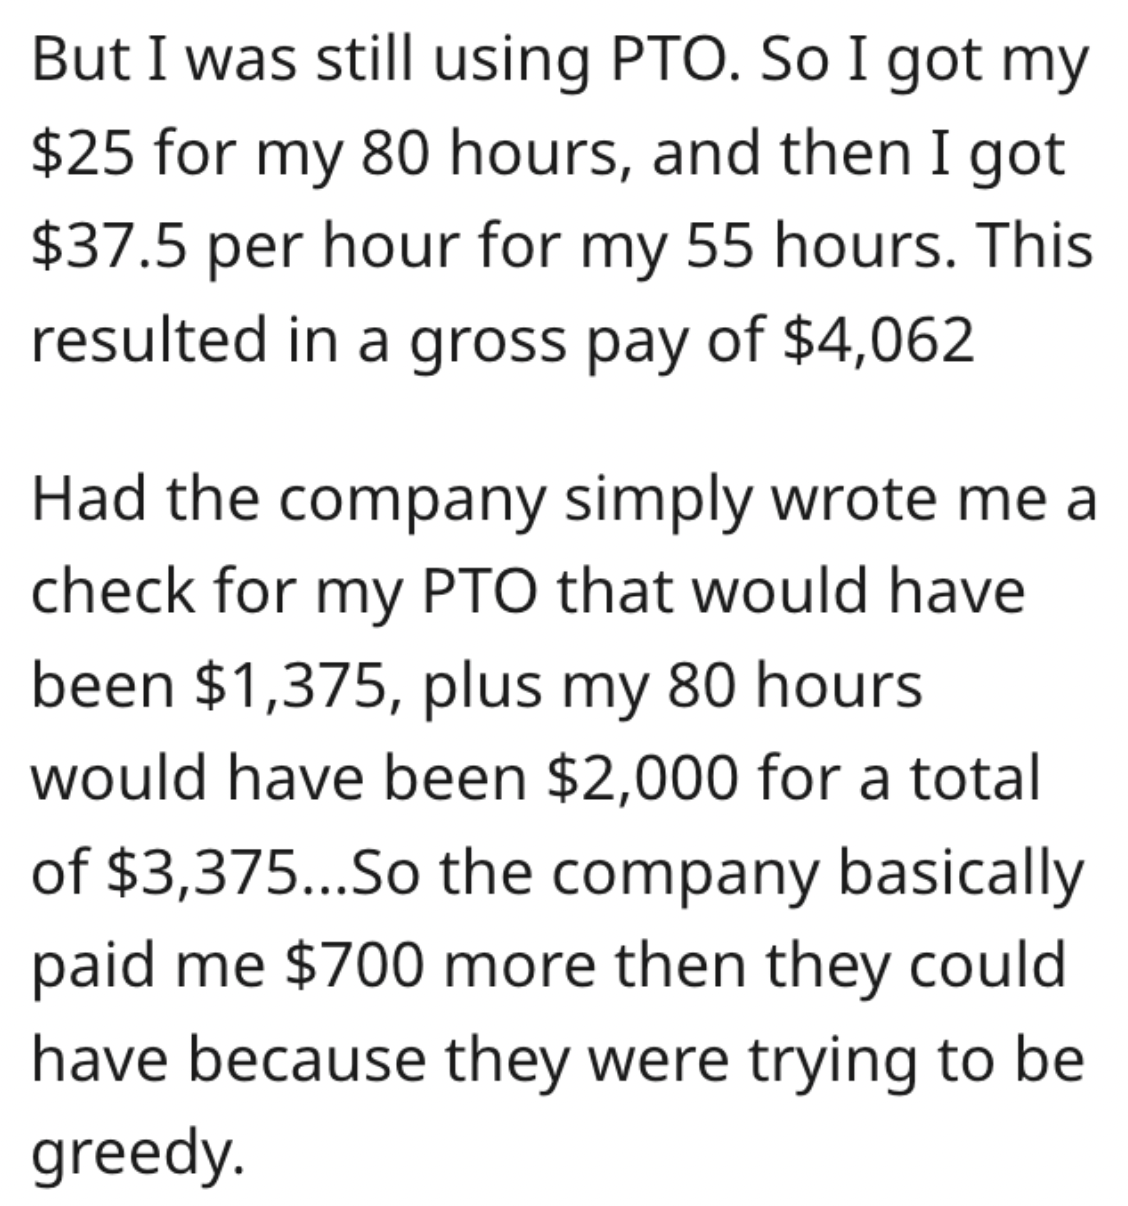 handwriting - But I was still using Pto. So I got my $25 for my 80 hours, and then I got $37.5 per hour for my 55 hours. This resulted in a gross pay of $4,062 Had the company simply wrote me a check for my Pto that would have been $1,375, plus my 80 hour